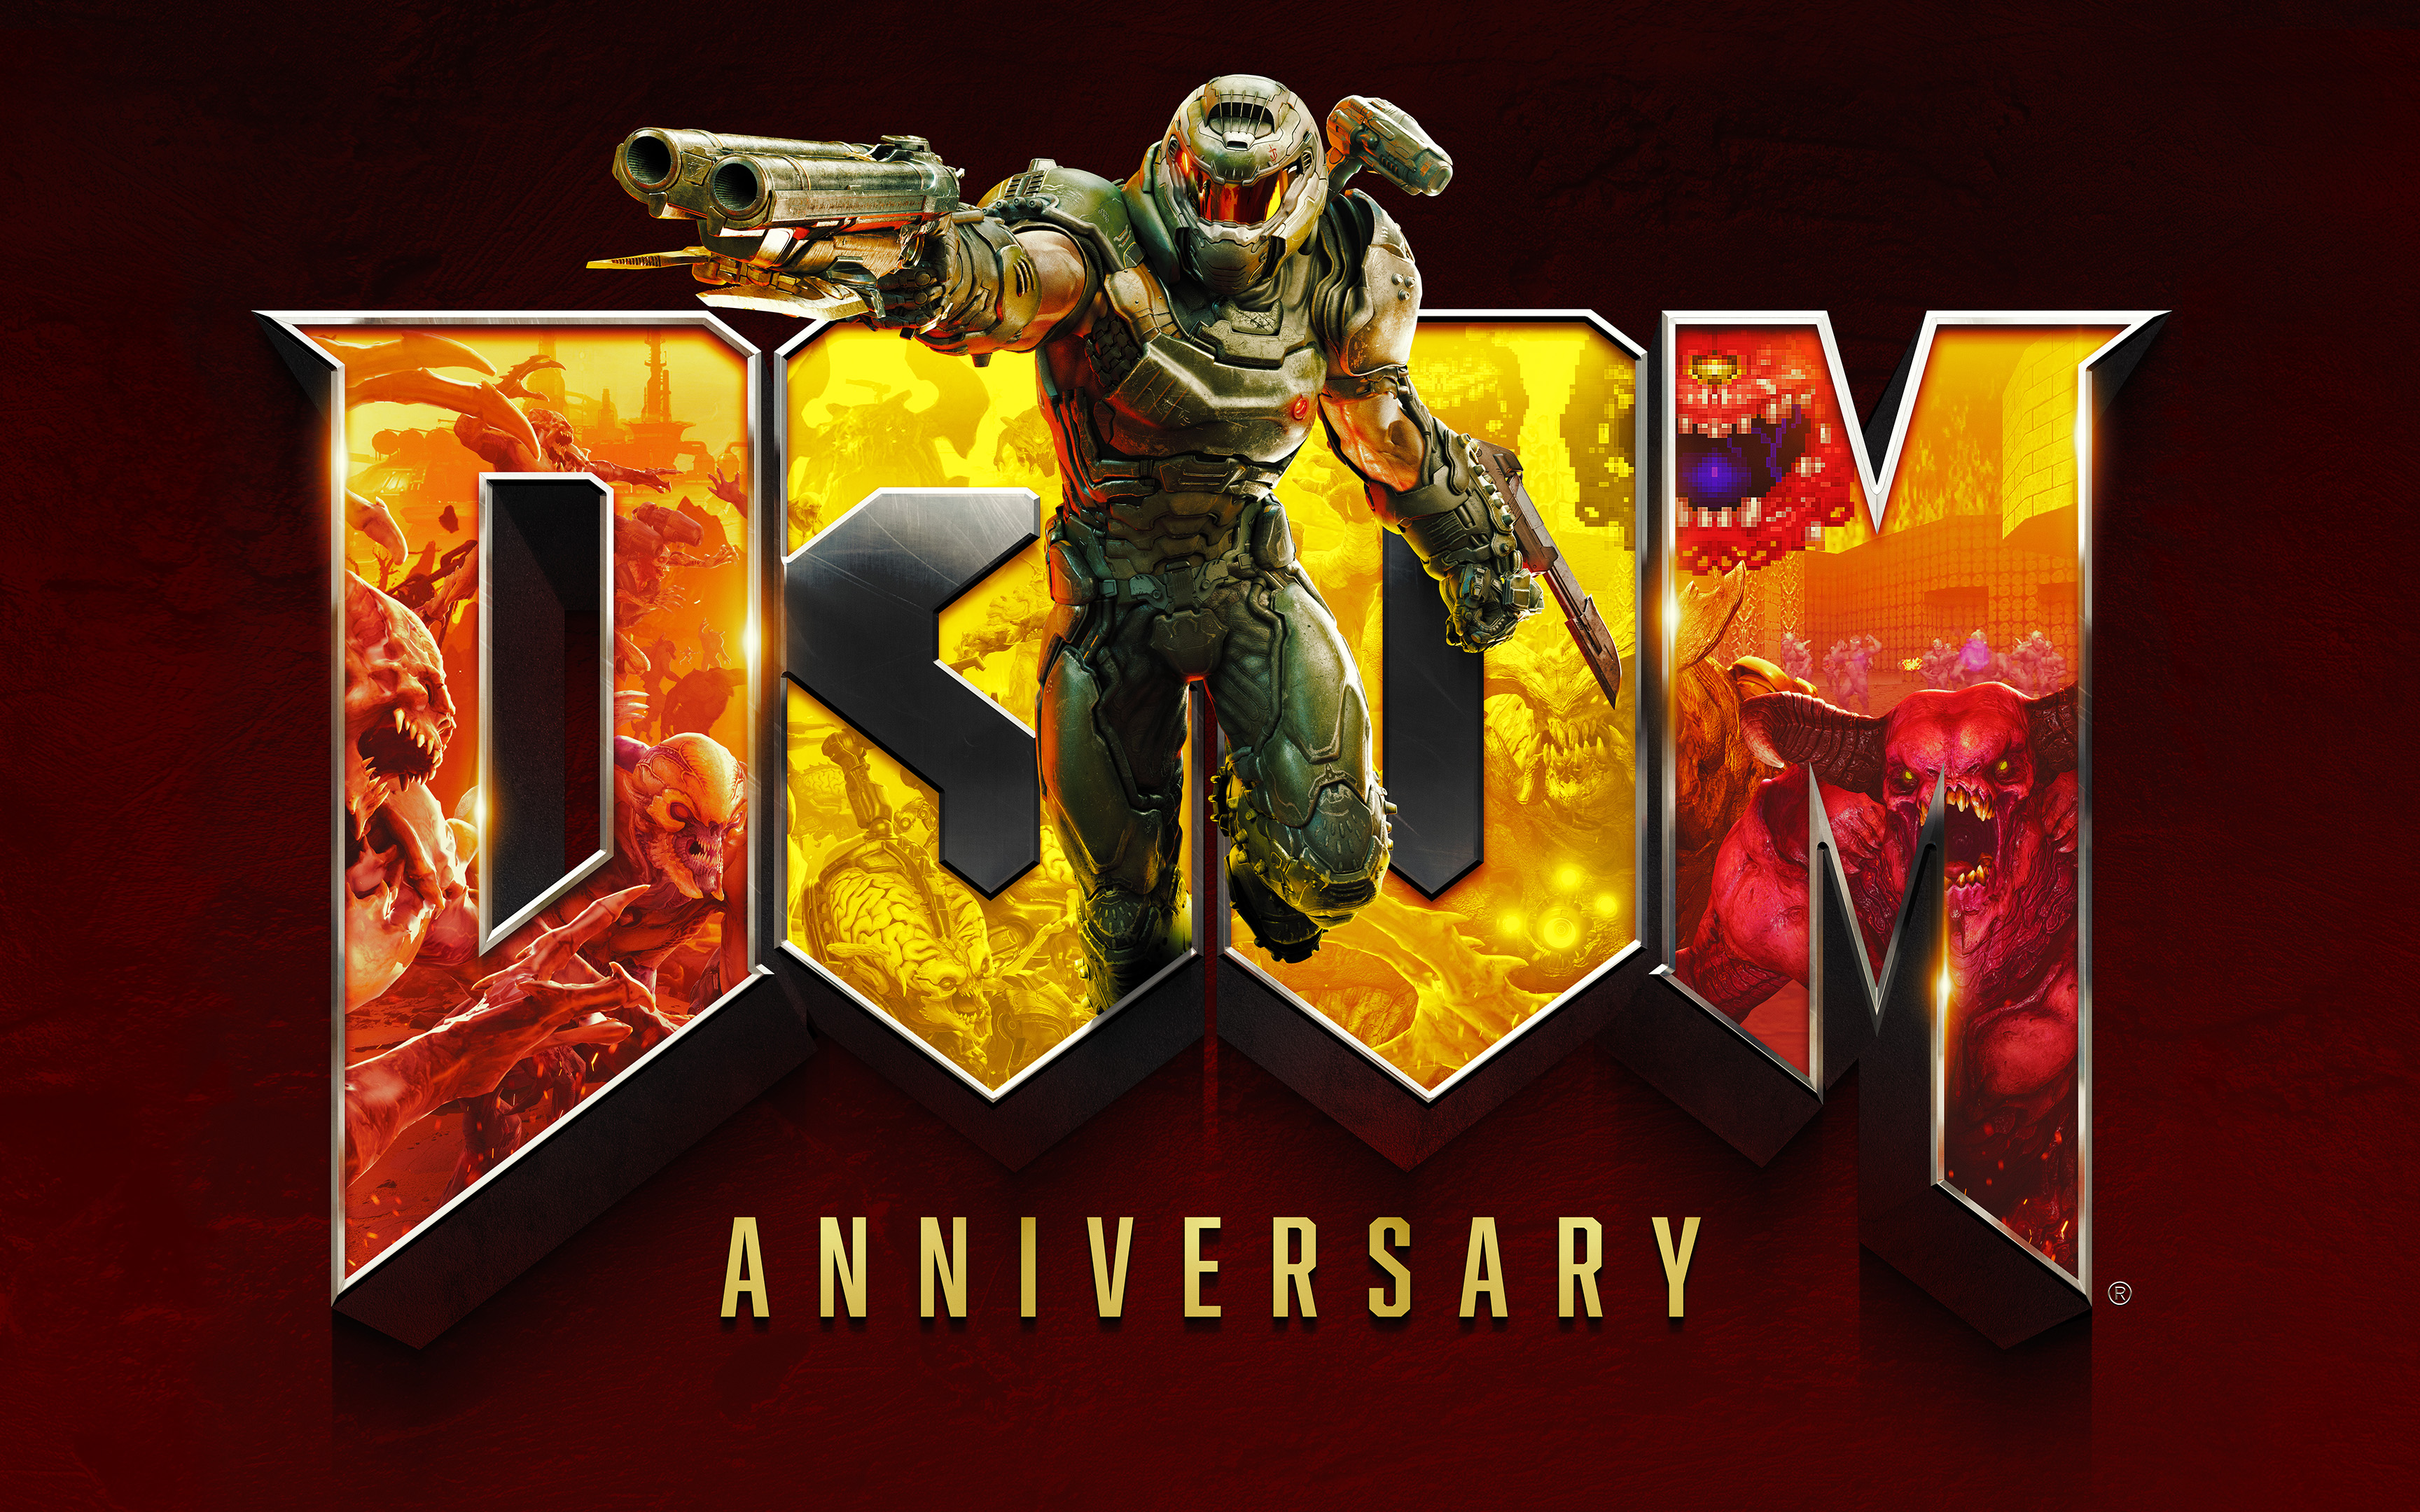 DOOM turns 30 today!  This game changed our industry forever